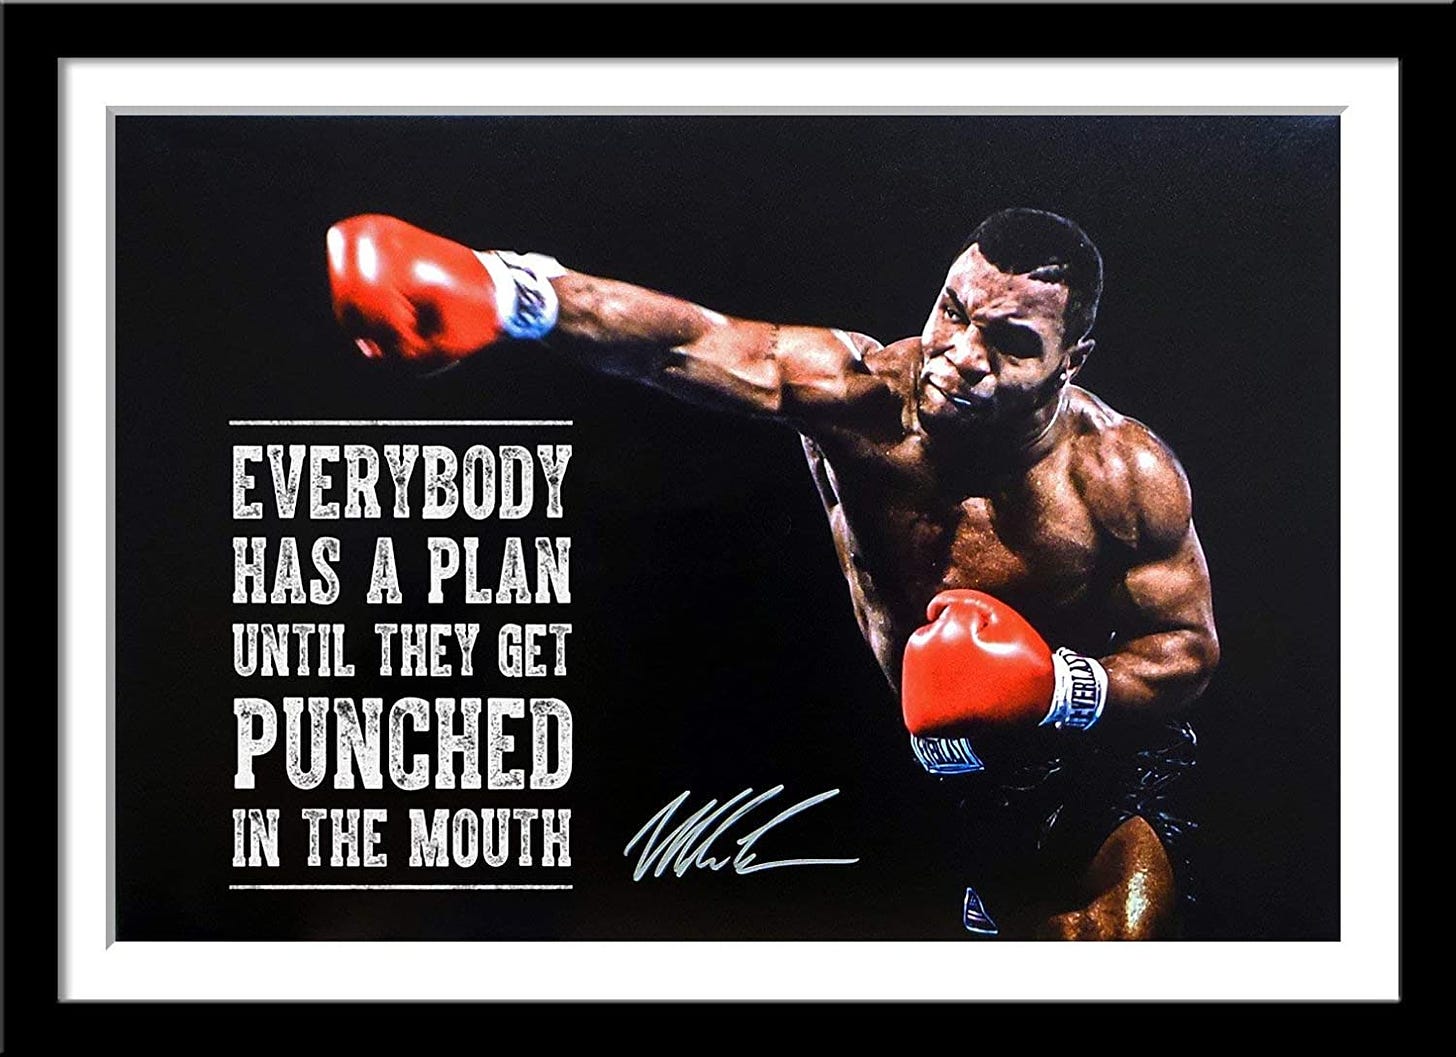 Tallenge - Mike Tyson - Everybody Has A Plan Till They Get Punched in The  Mouth - Large Poster Paper - Framed (24 x 34 inches) - Multi Colour:  Amazon.in: Home & Kitchen